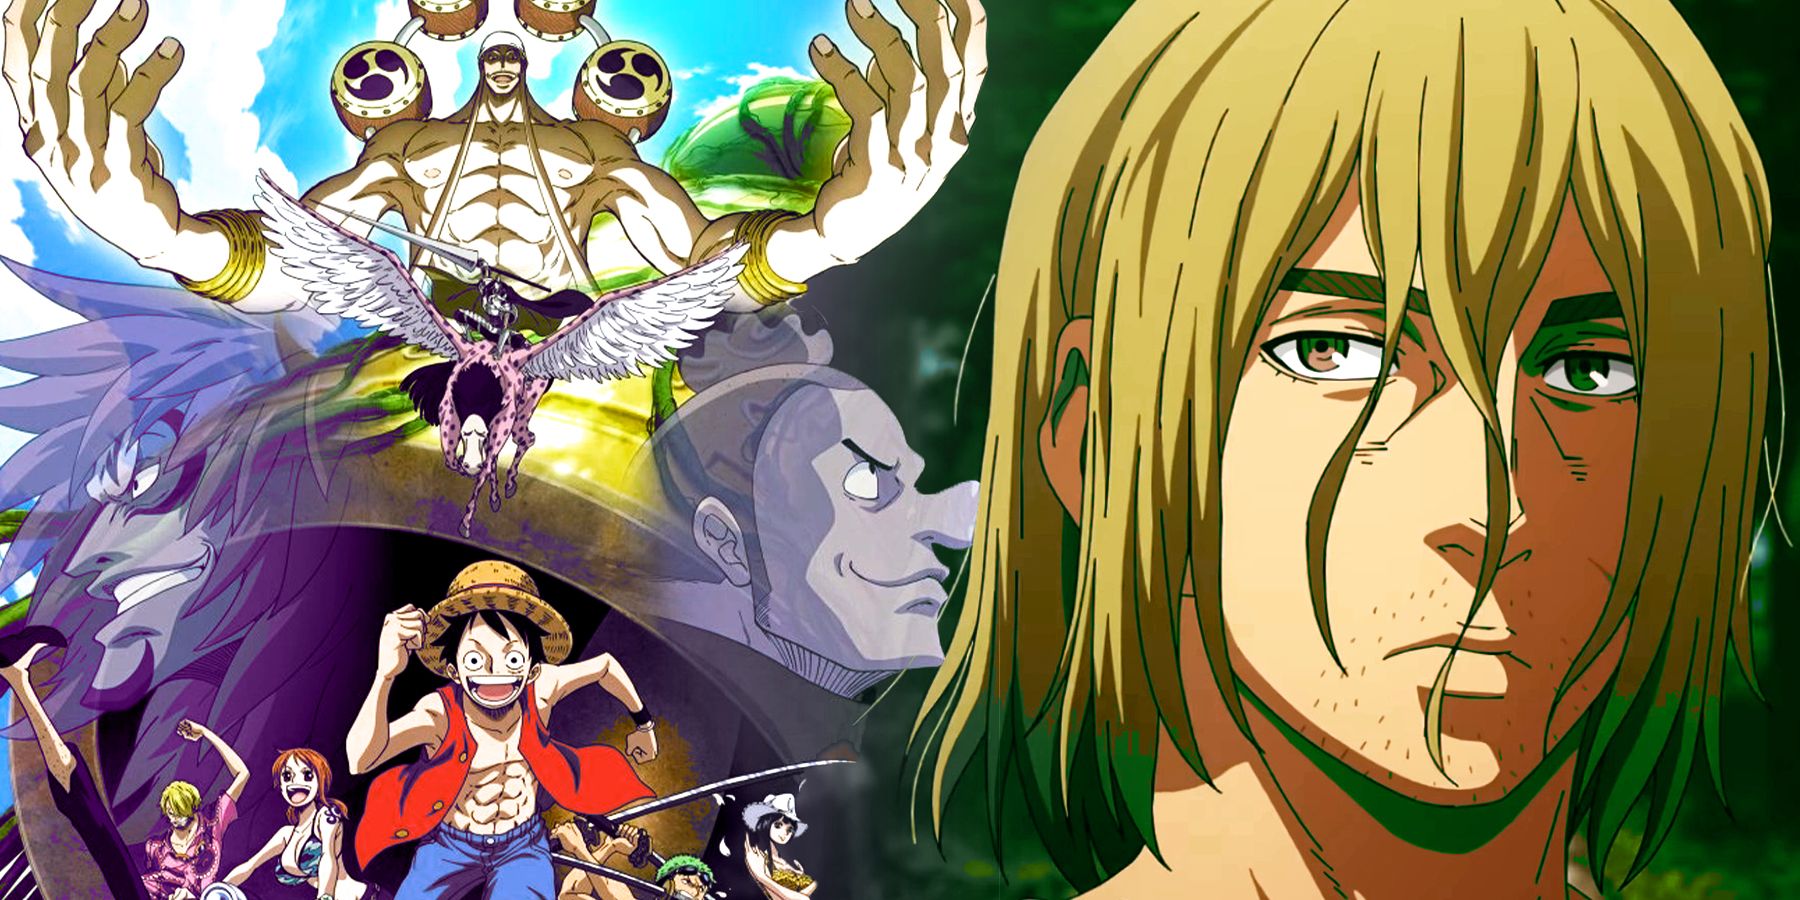 Luffy and characters from the One Piece Skypiea Arc and Thorfinn of Vinland Saga